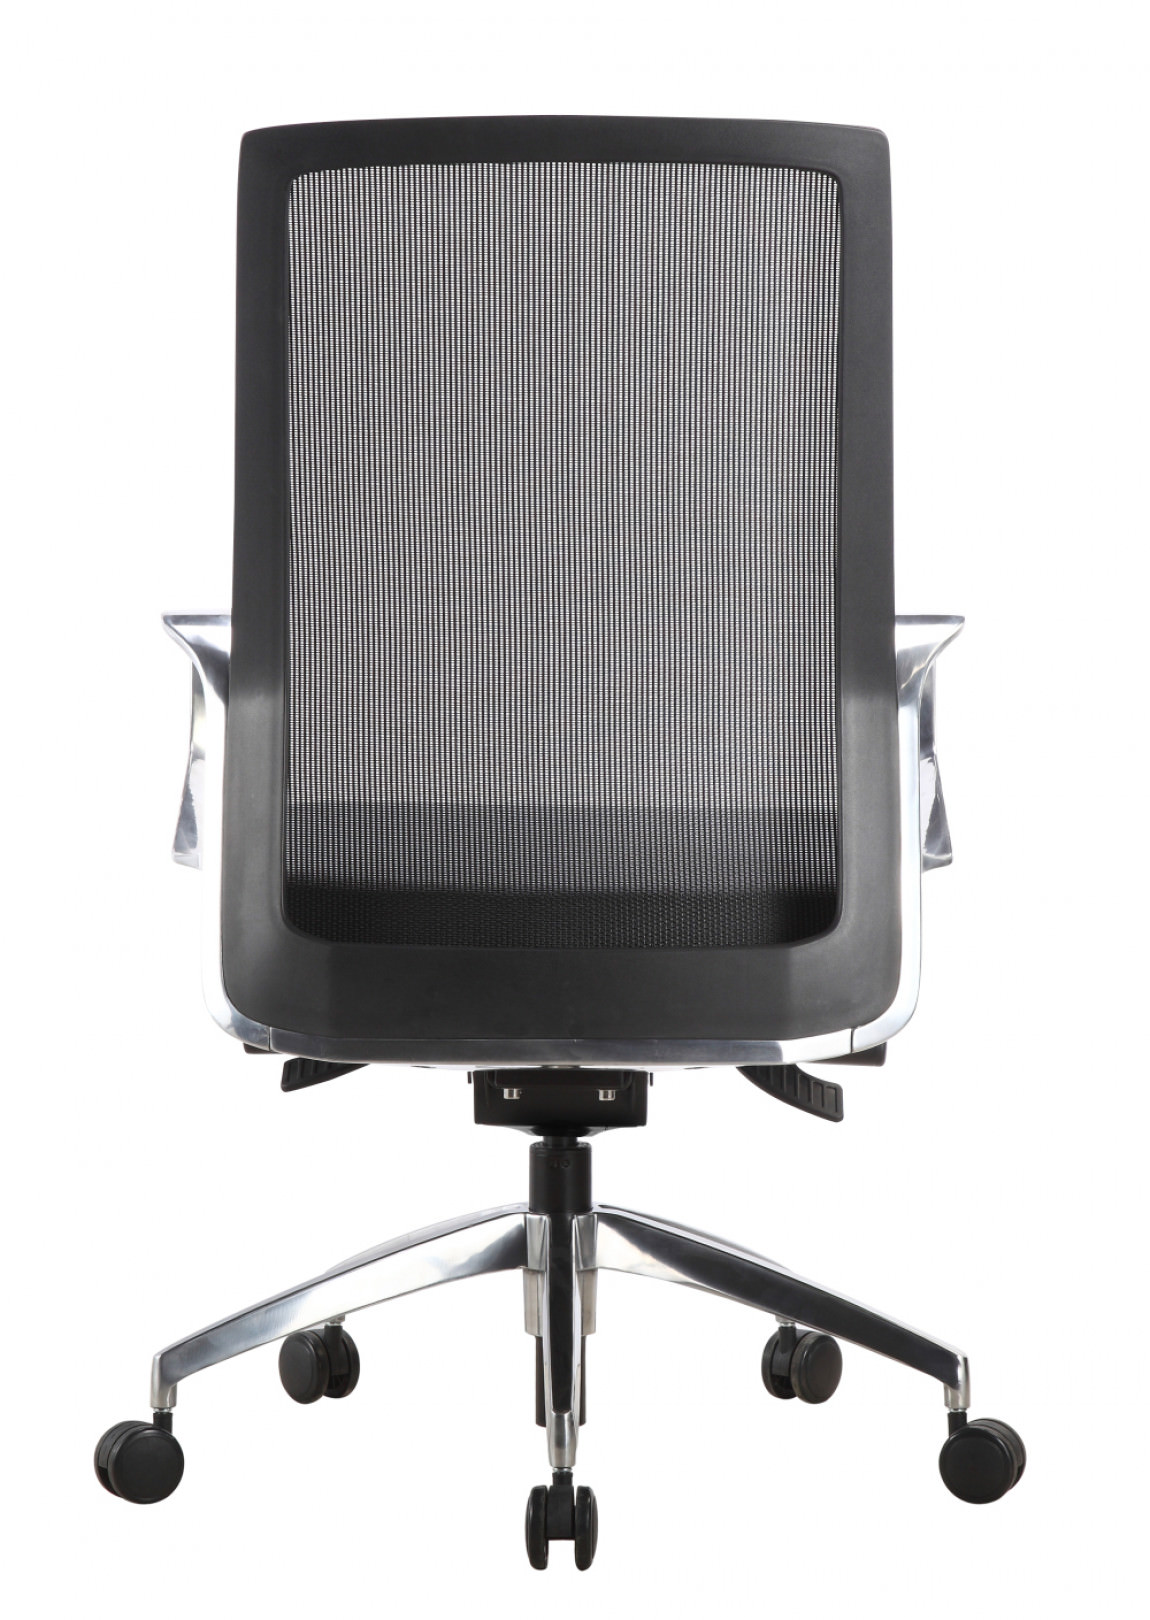 Executive Task Chair with Gray Seat Cover